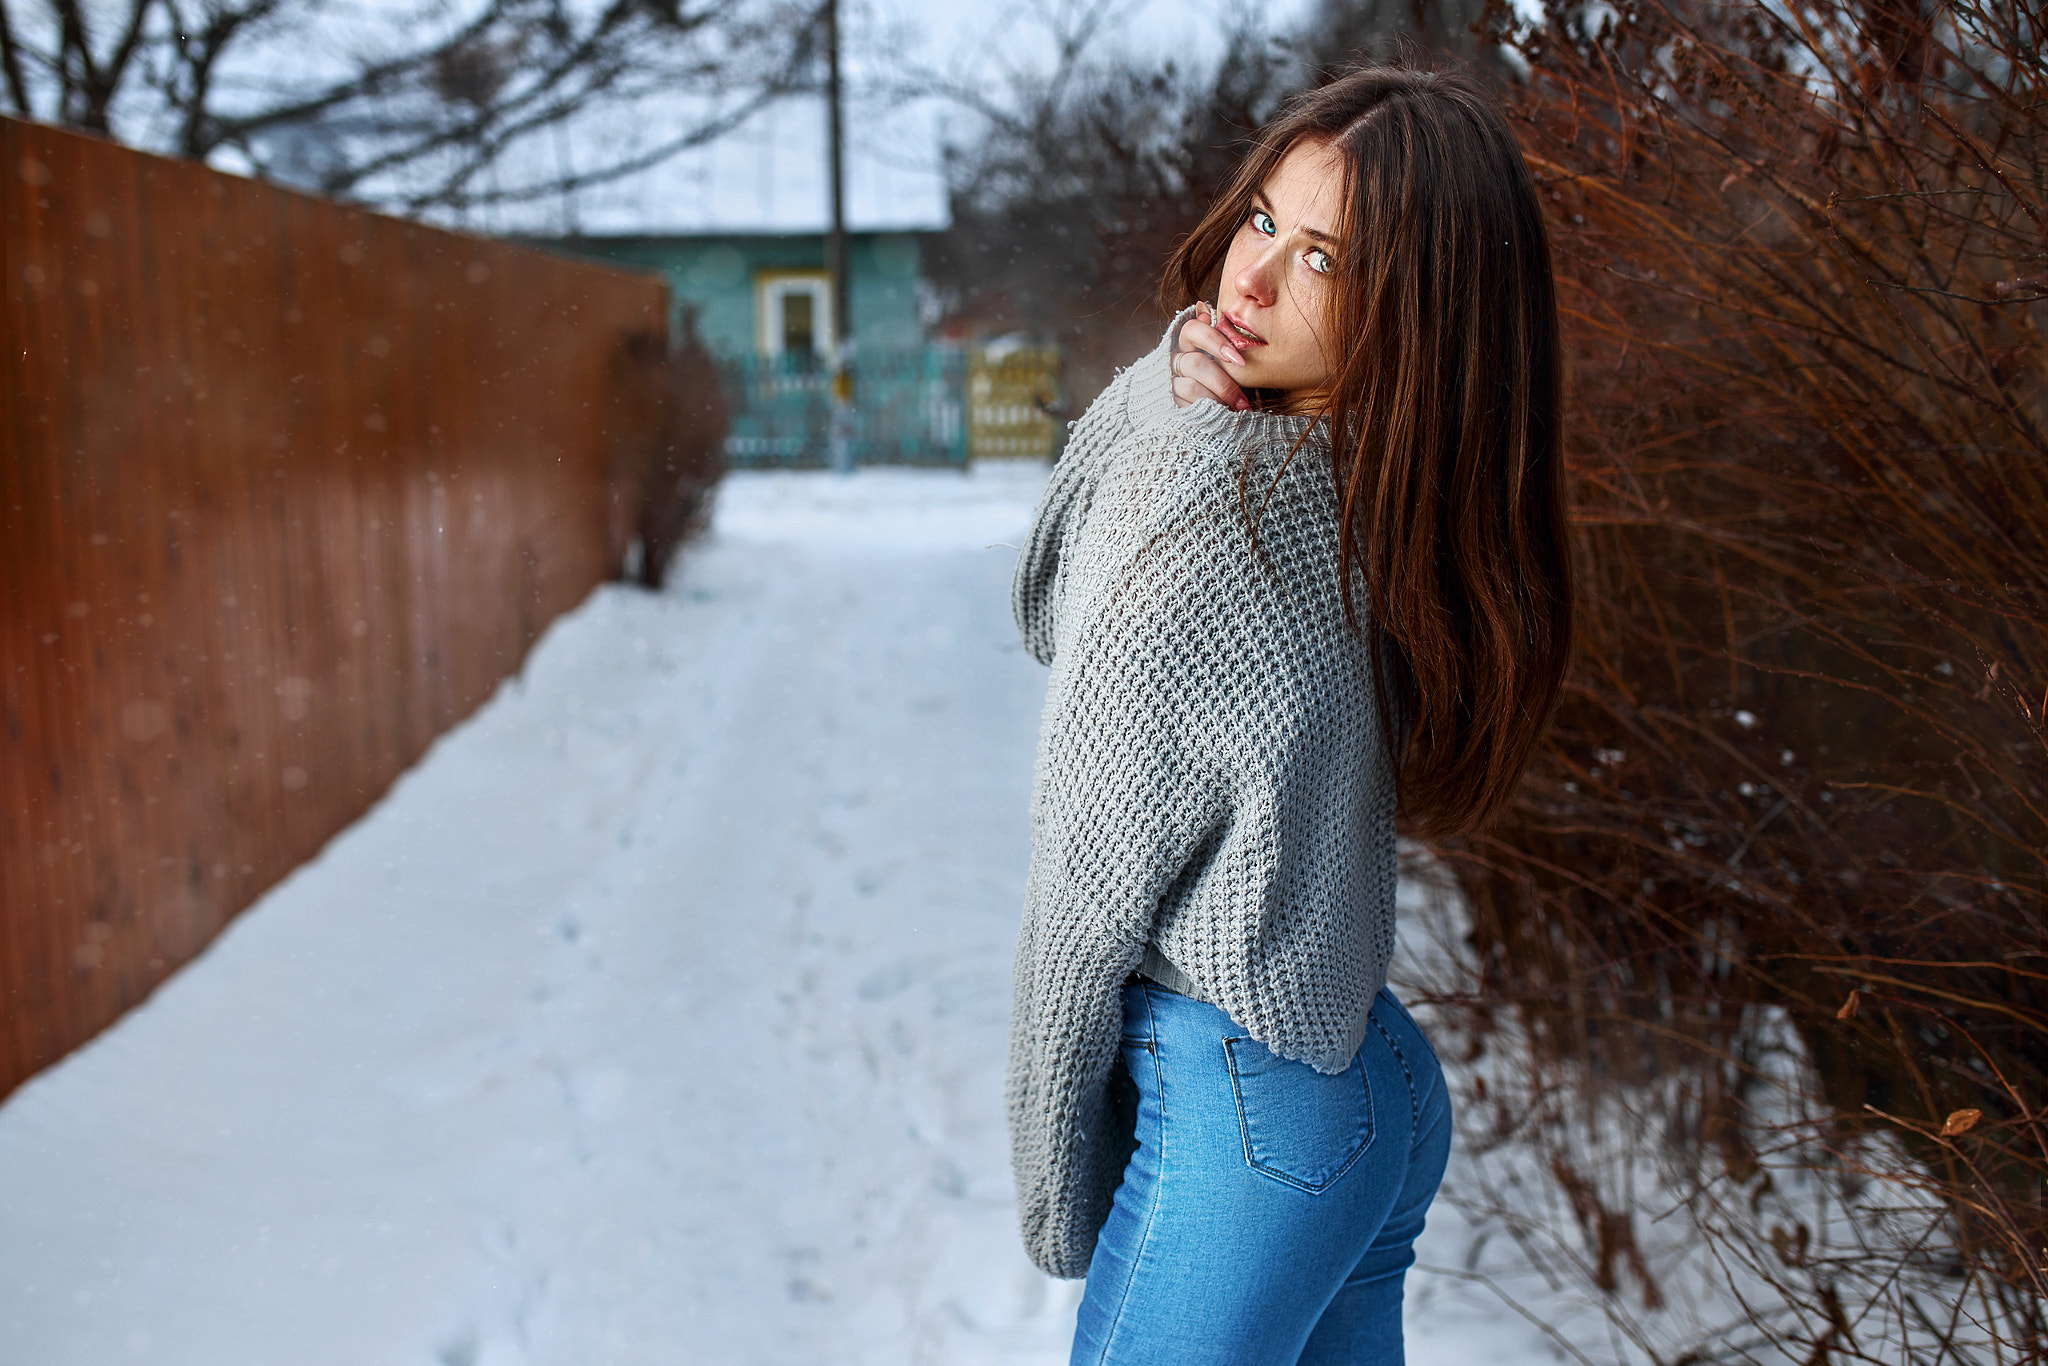 Women Winter Snow Women Outdoors Finger On Lips Jeans Sweater Pink Nails Looking At Viewer 2048x1366